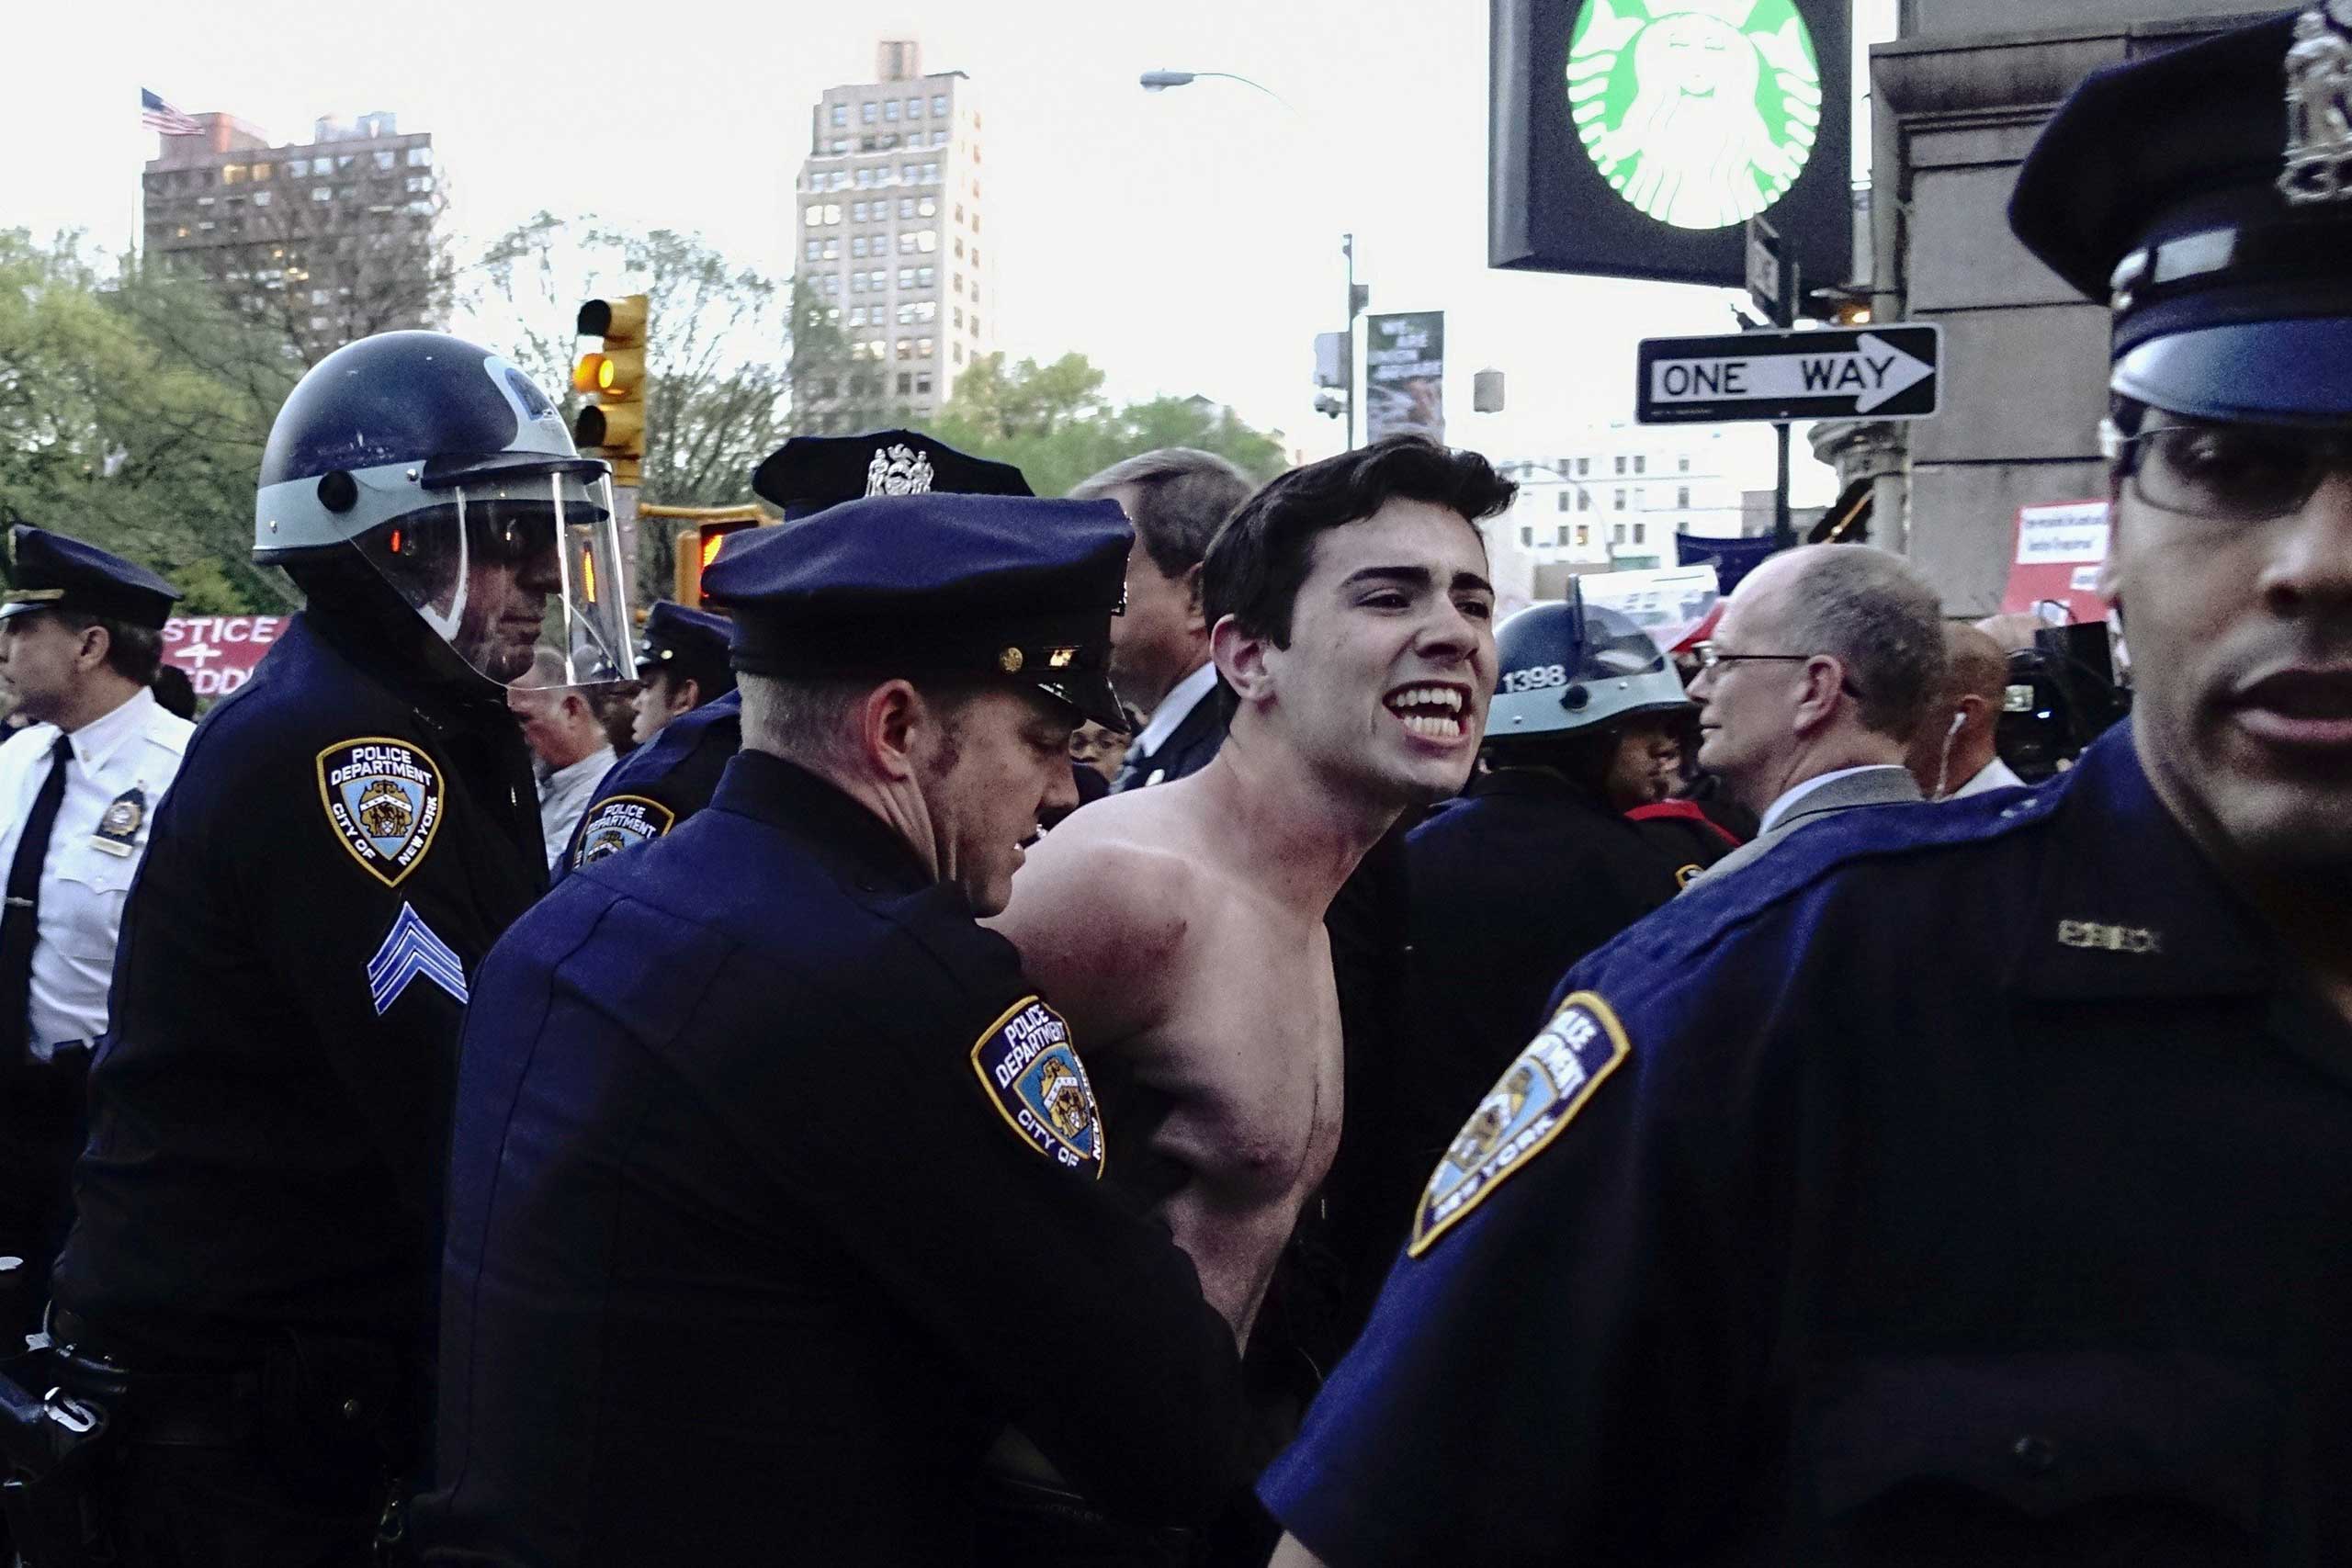 A demonstrator is arrested by NYPD officers during a protest at Union Square in New York City on April 29, 2015.